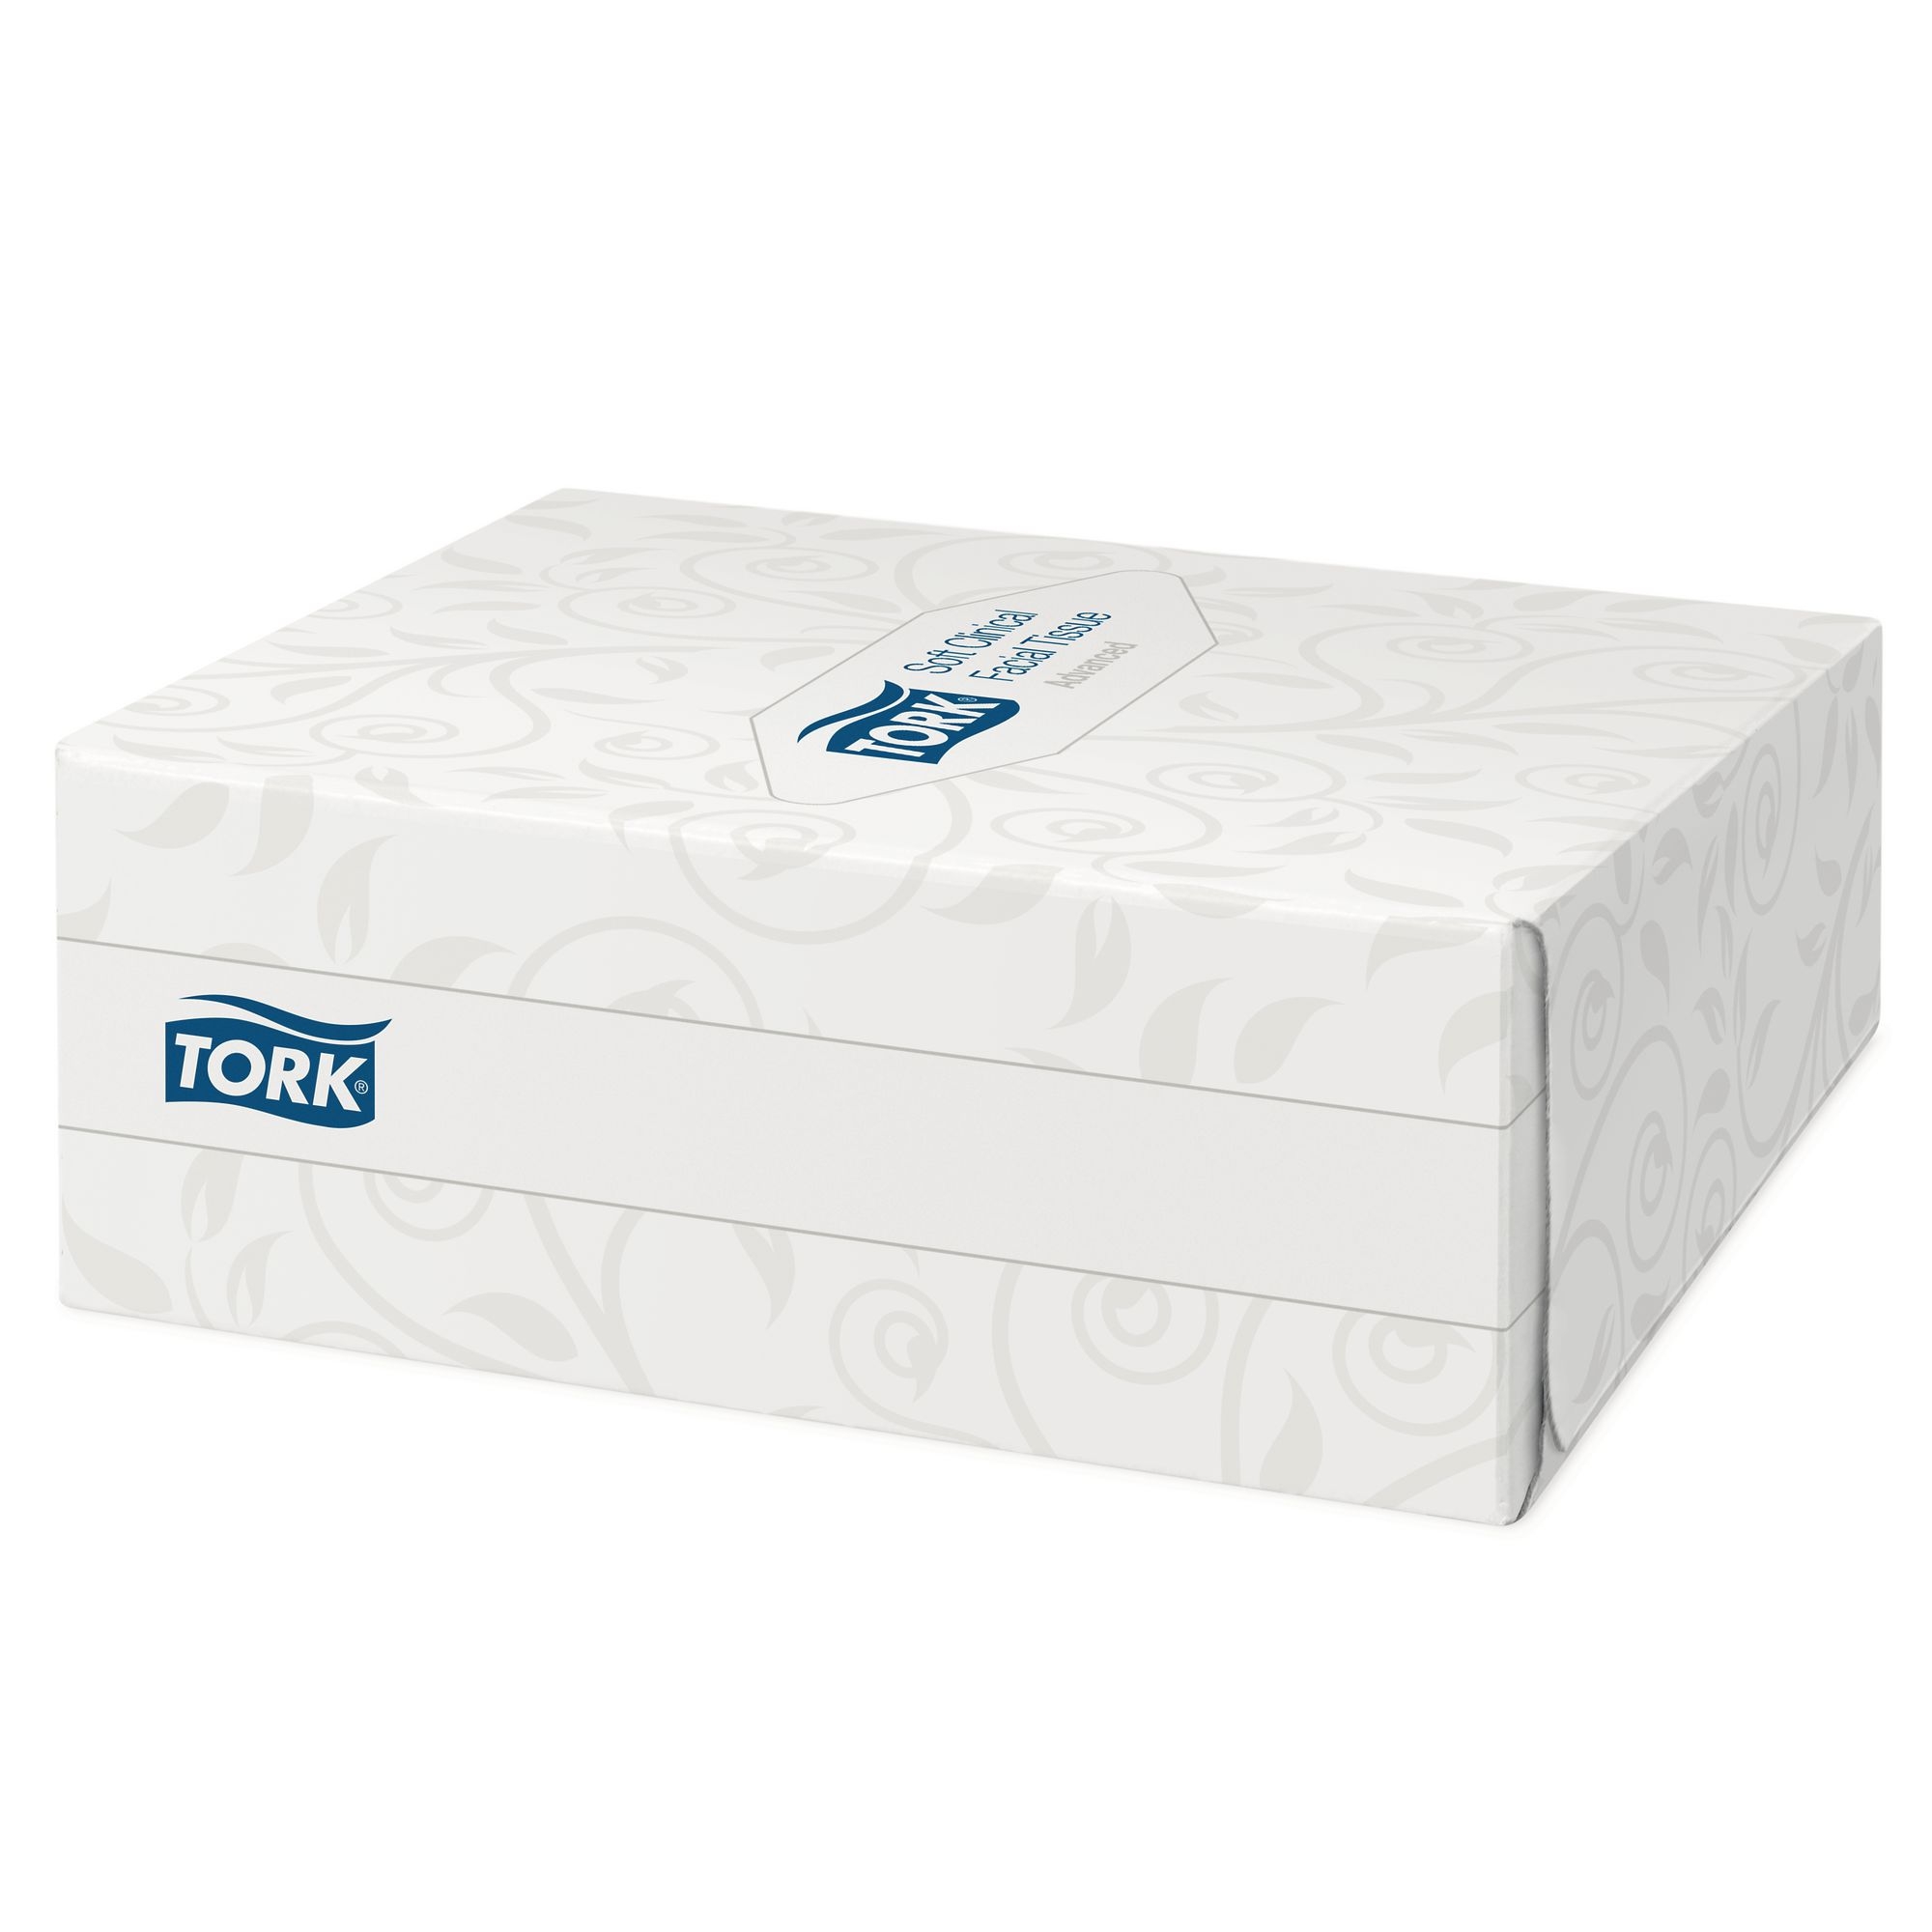 Tork Soft Clinical Facial Tissues 476418 (Pack of 36)